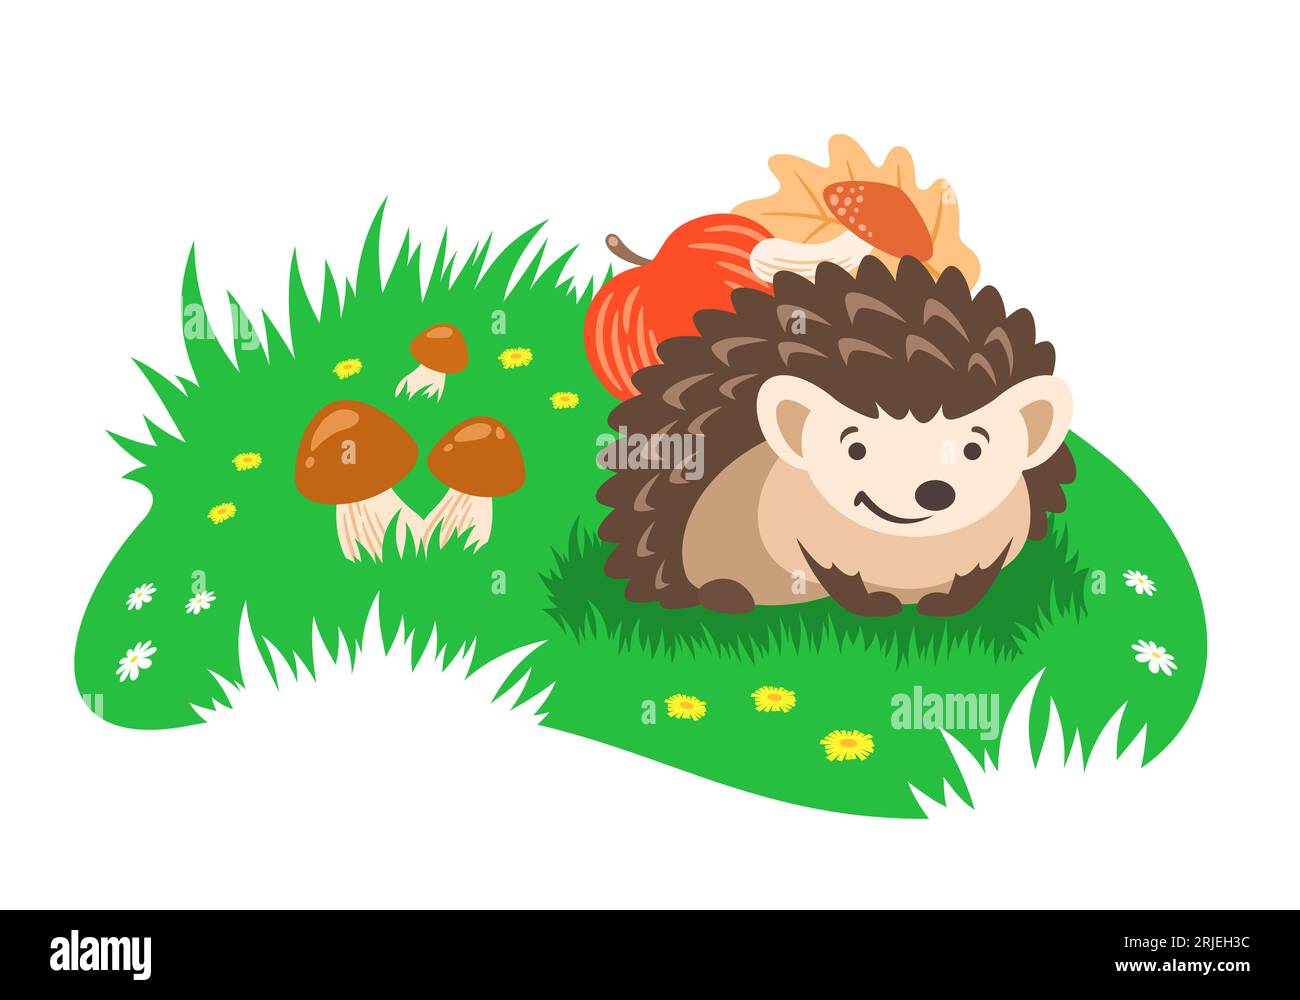 Cute little hedgehog sitting on green forest lawn. Cartoon banner. Smiling hedgehog carries an apple, a mushroom and an autumn leaf on its back. Adora Stock Vector